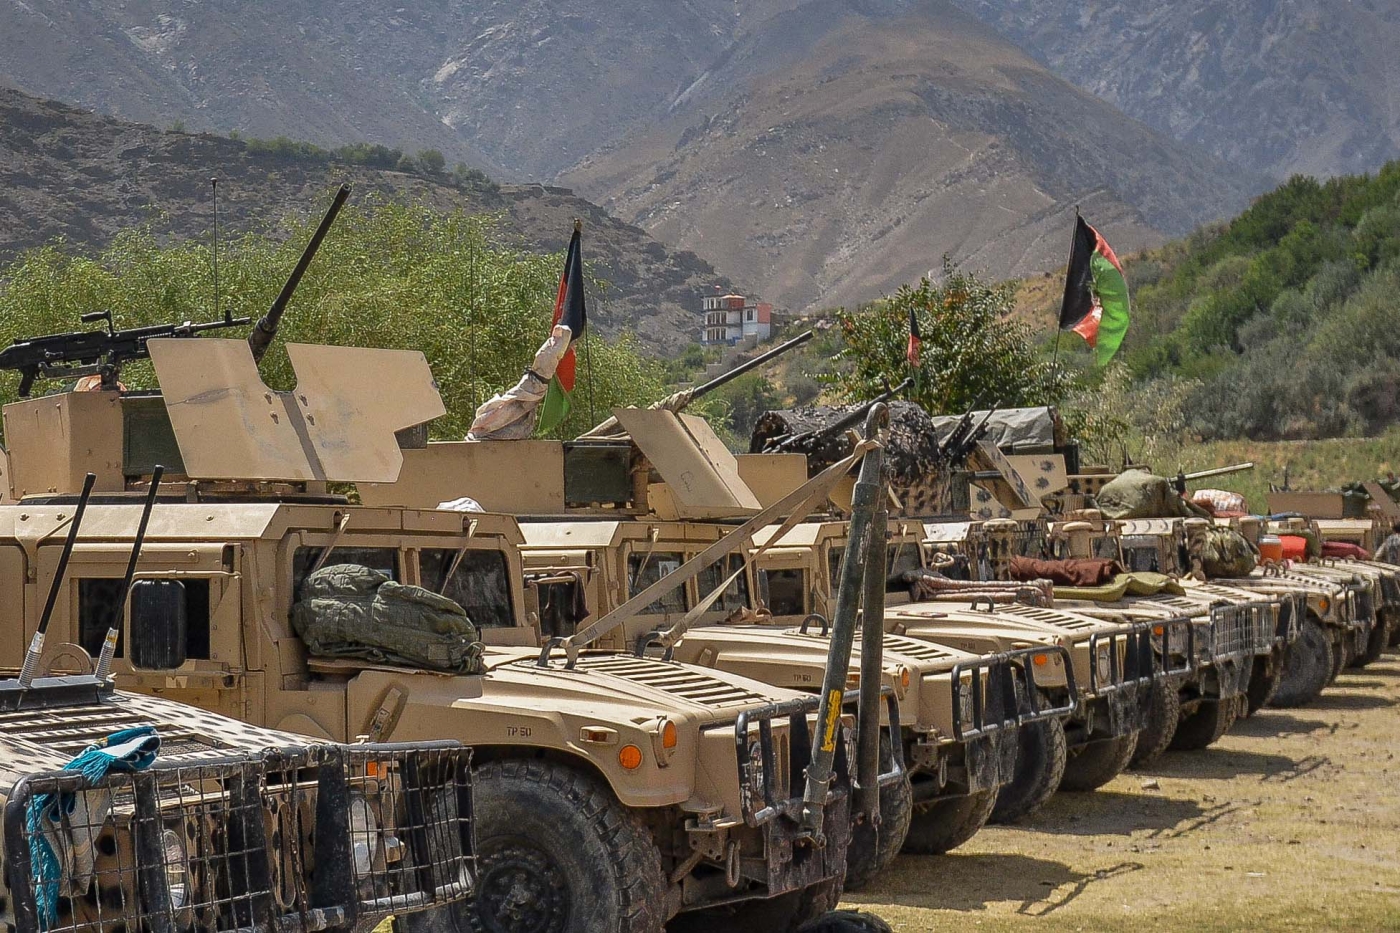 A picture taken on 19 August 2021 shows Humvee vehicles operated by Afghan armed men supporting the Afghan security forces against the Taliban in the Panjshir province.